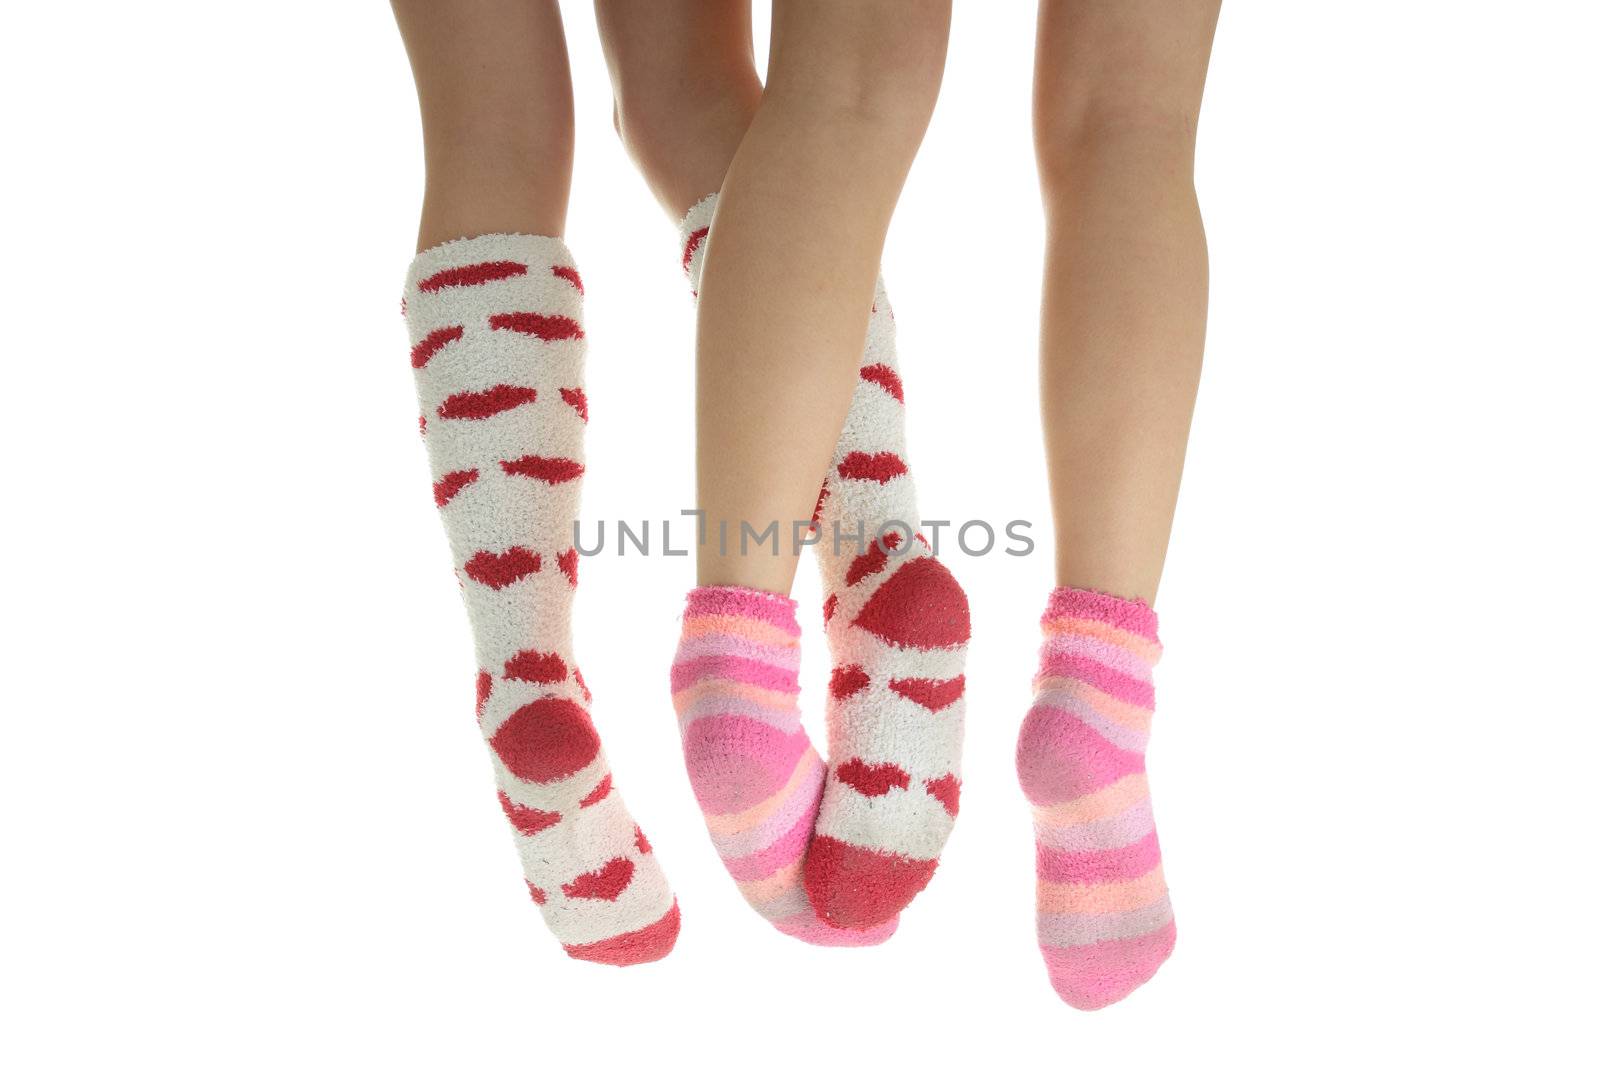 Four crossed legs with colorful socks (isolated on white) - friendship or love concept